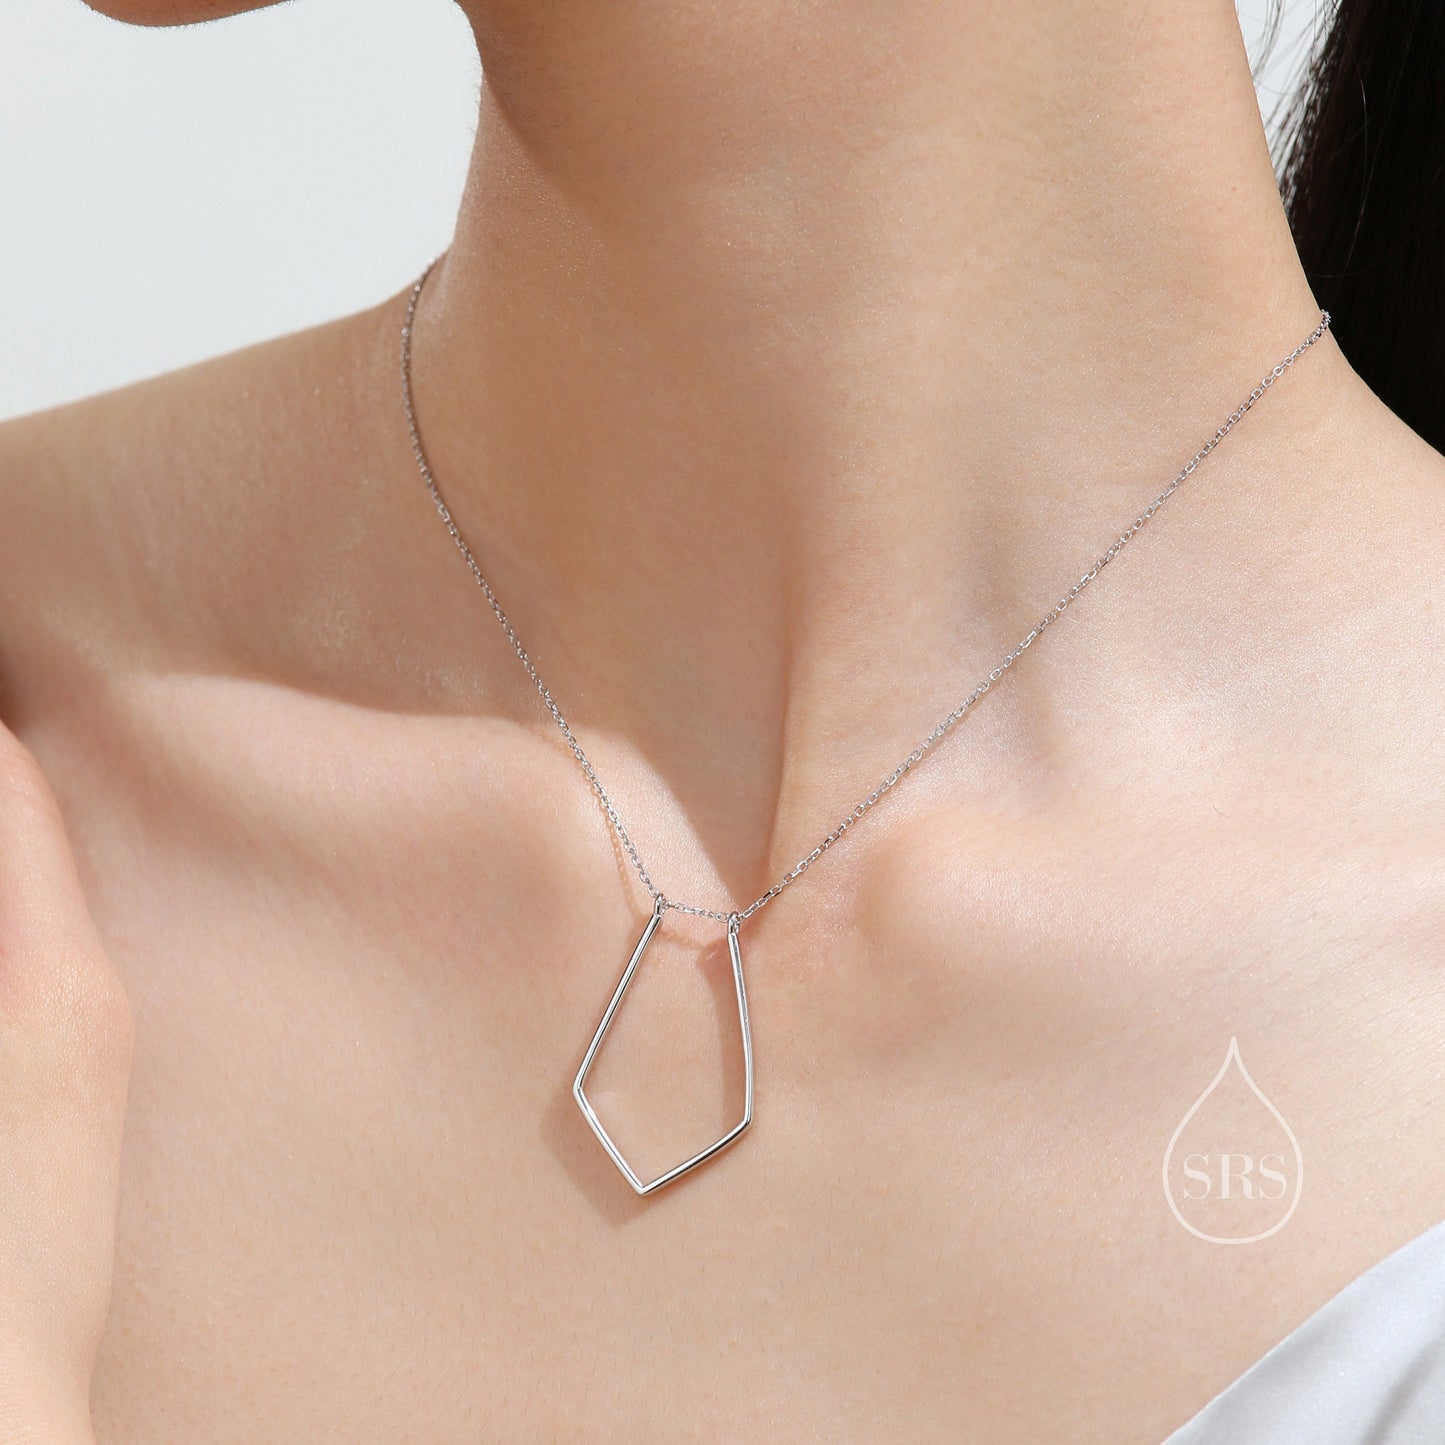 UK Only Item. Rhombus Pentagon Minimalist Necklace in Sterling Silver, Silver or Gold, Geometric Pendant Necklace. Ring Holder Necklace.